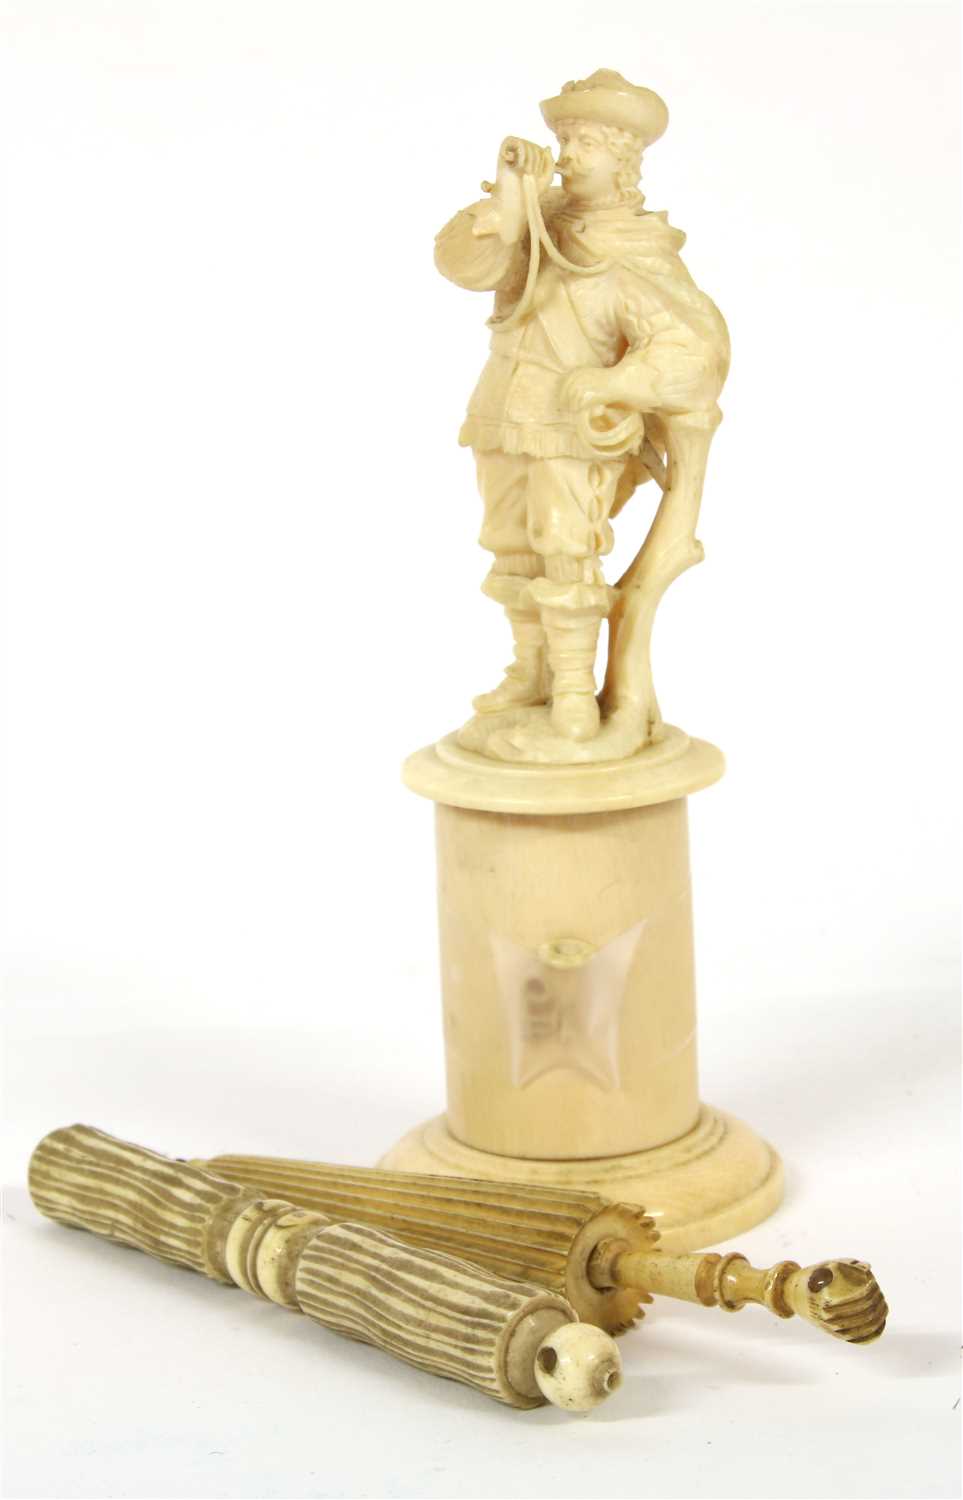 Lot 175 - A 19th century Dieppe ivory figure of a musician